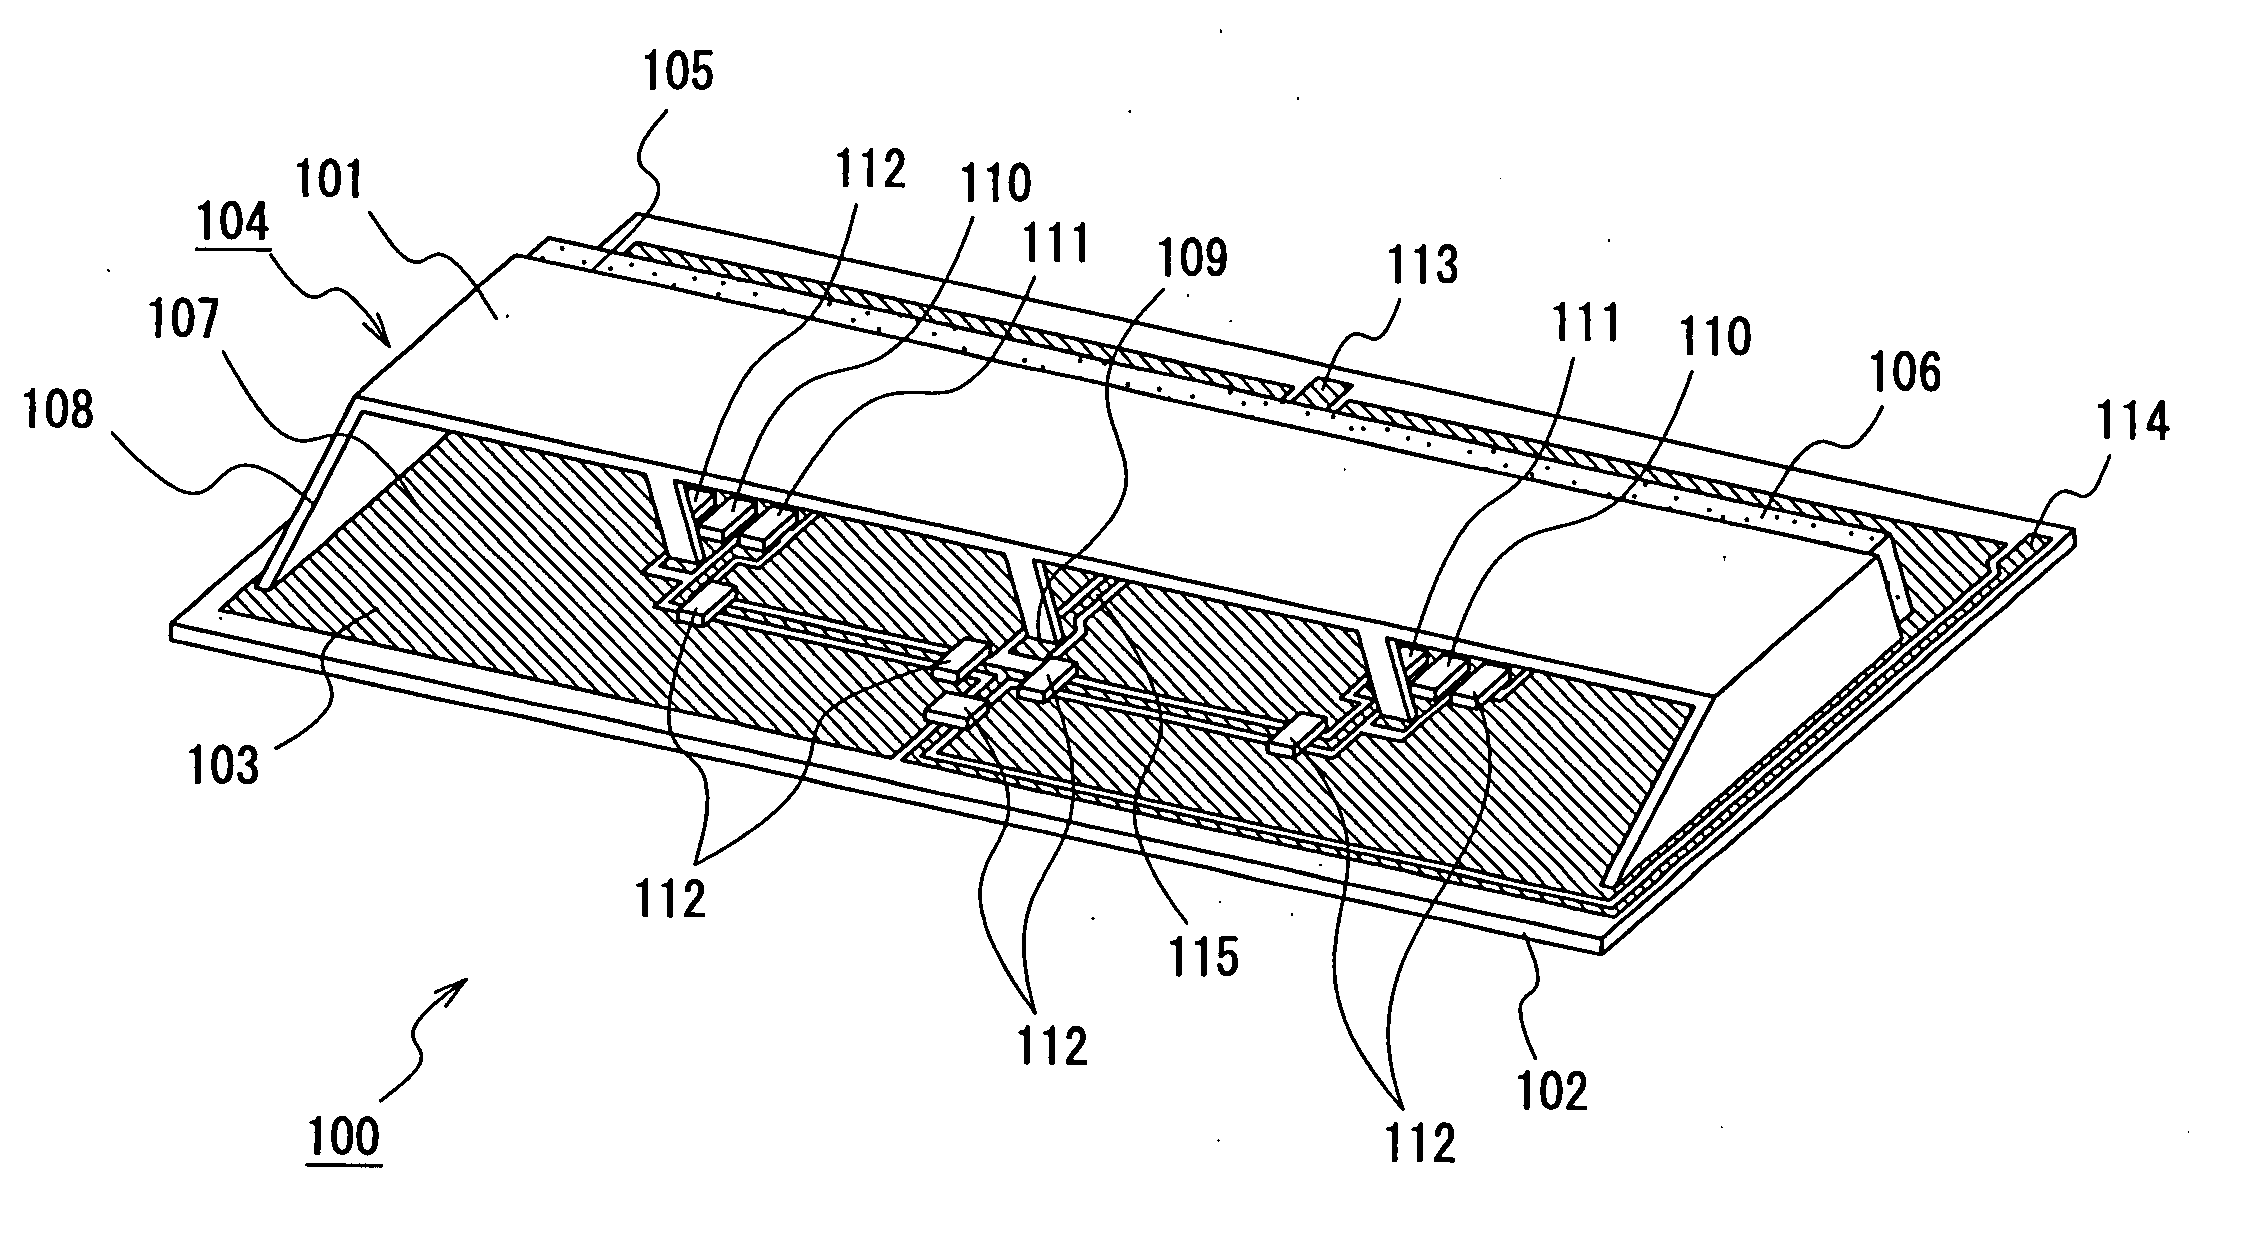 Broadcast receiving antenna and television broadcast receiver